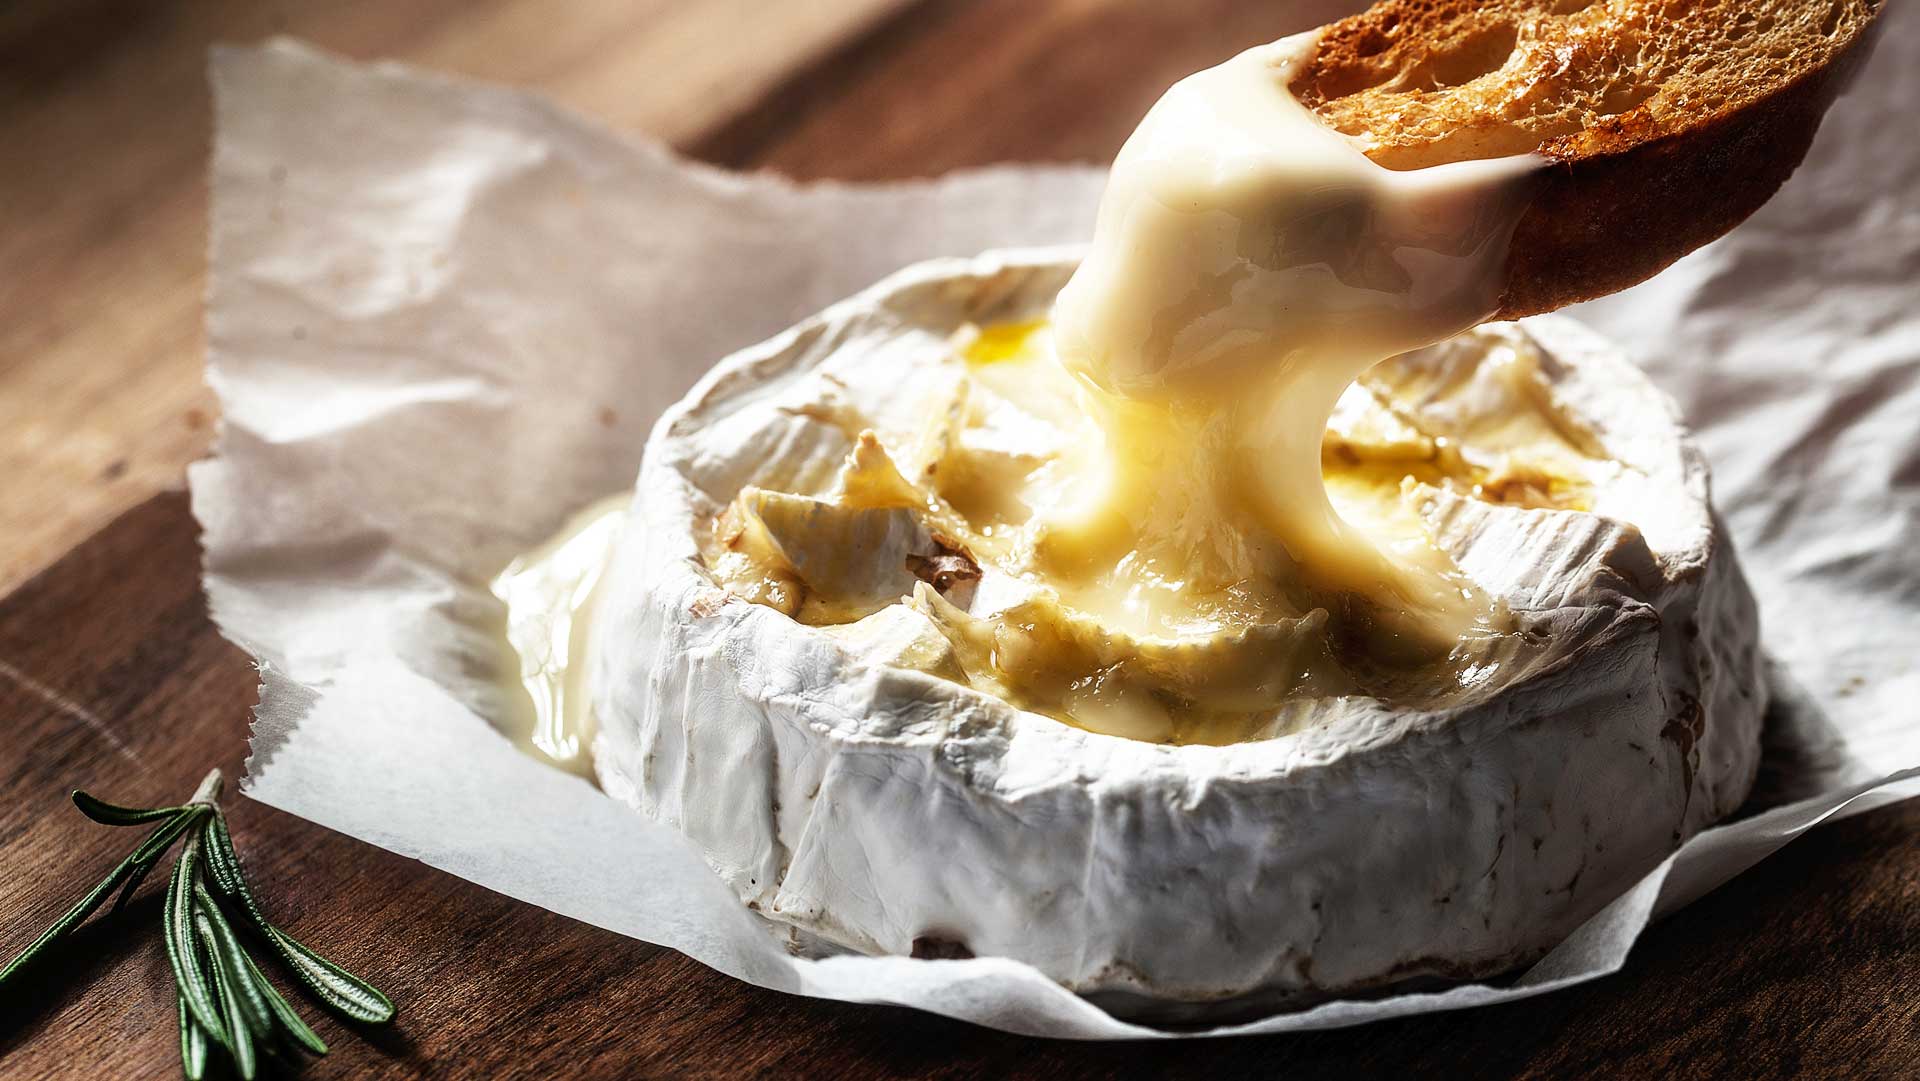 Cheese is actually quite good for you